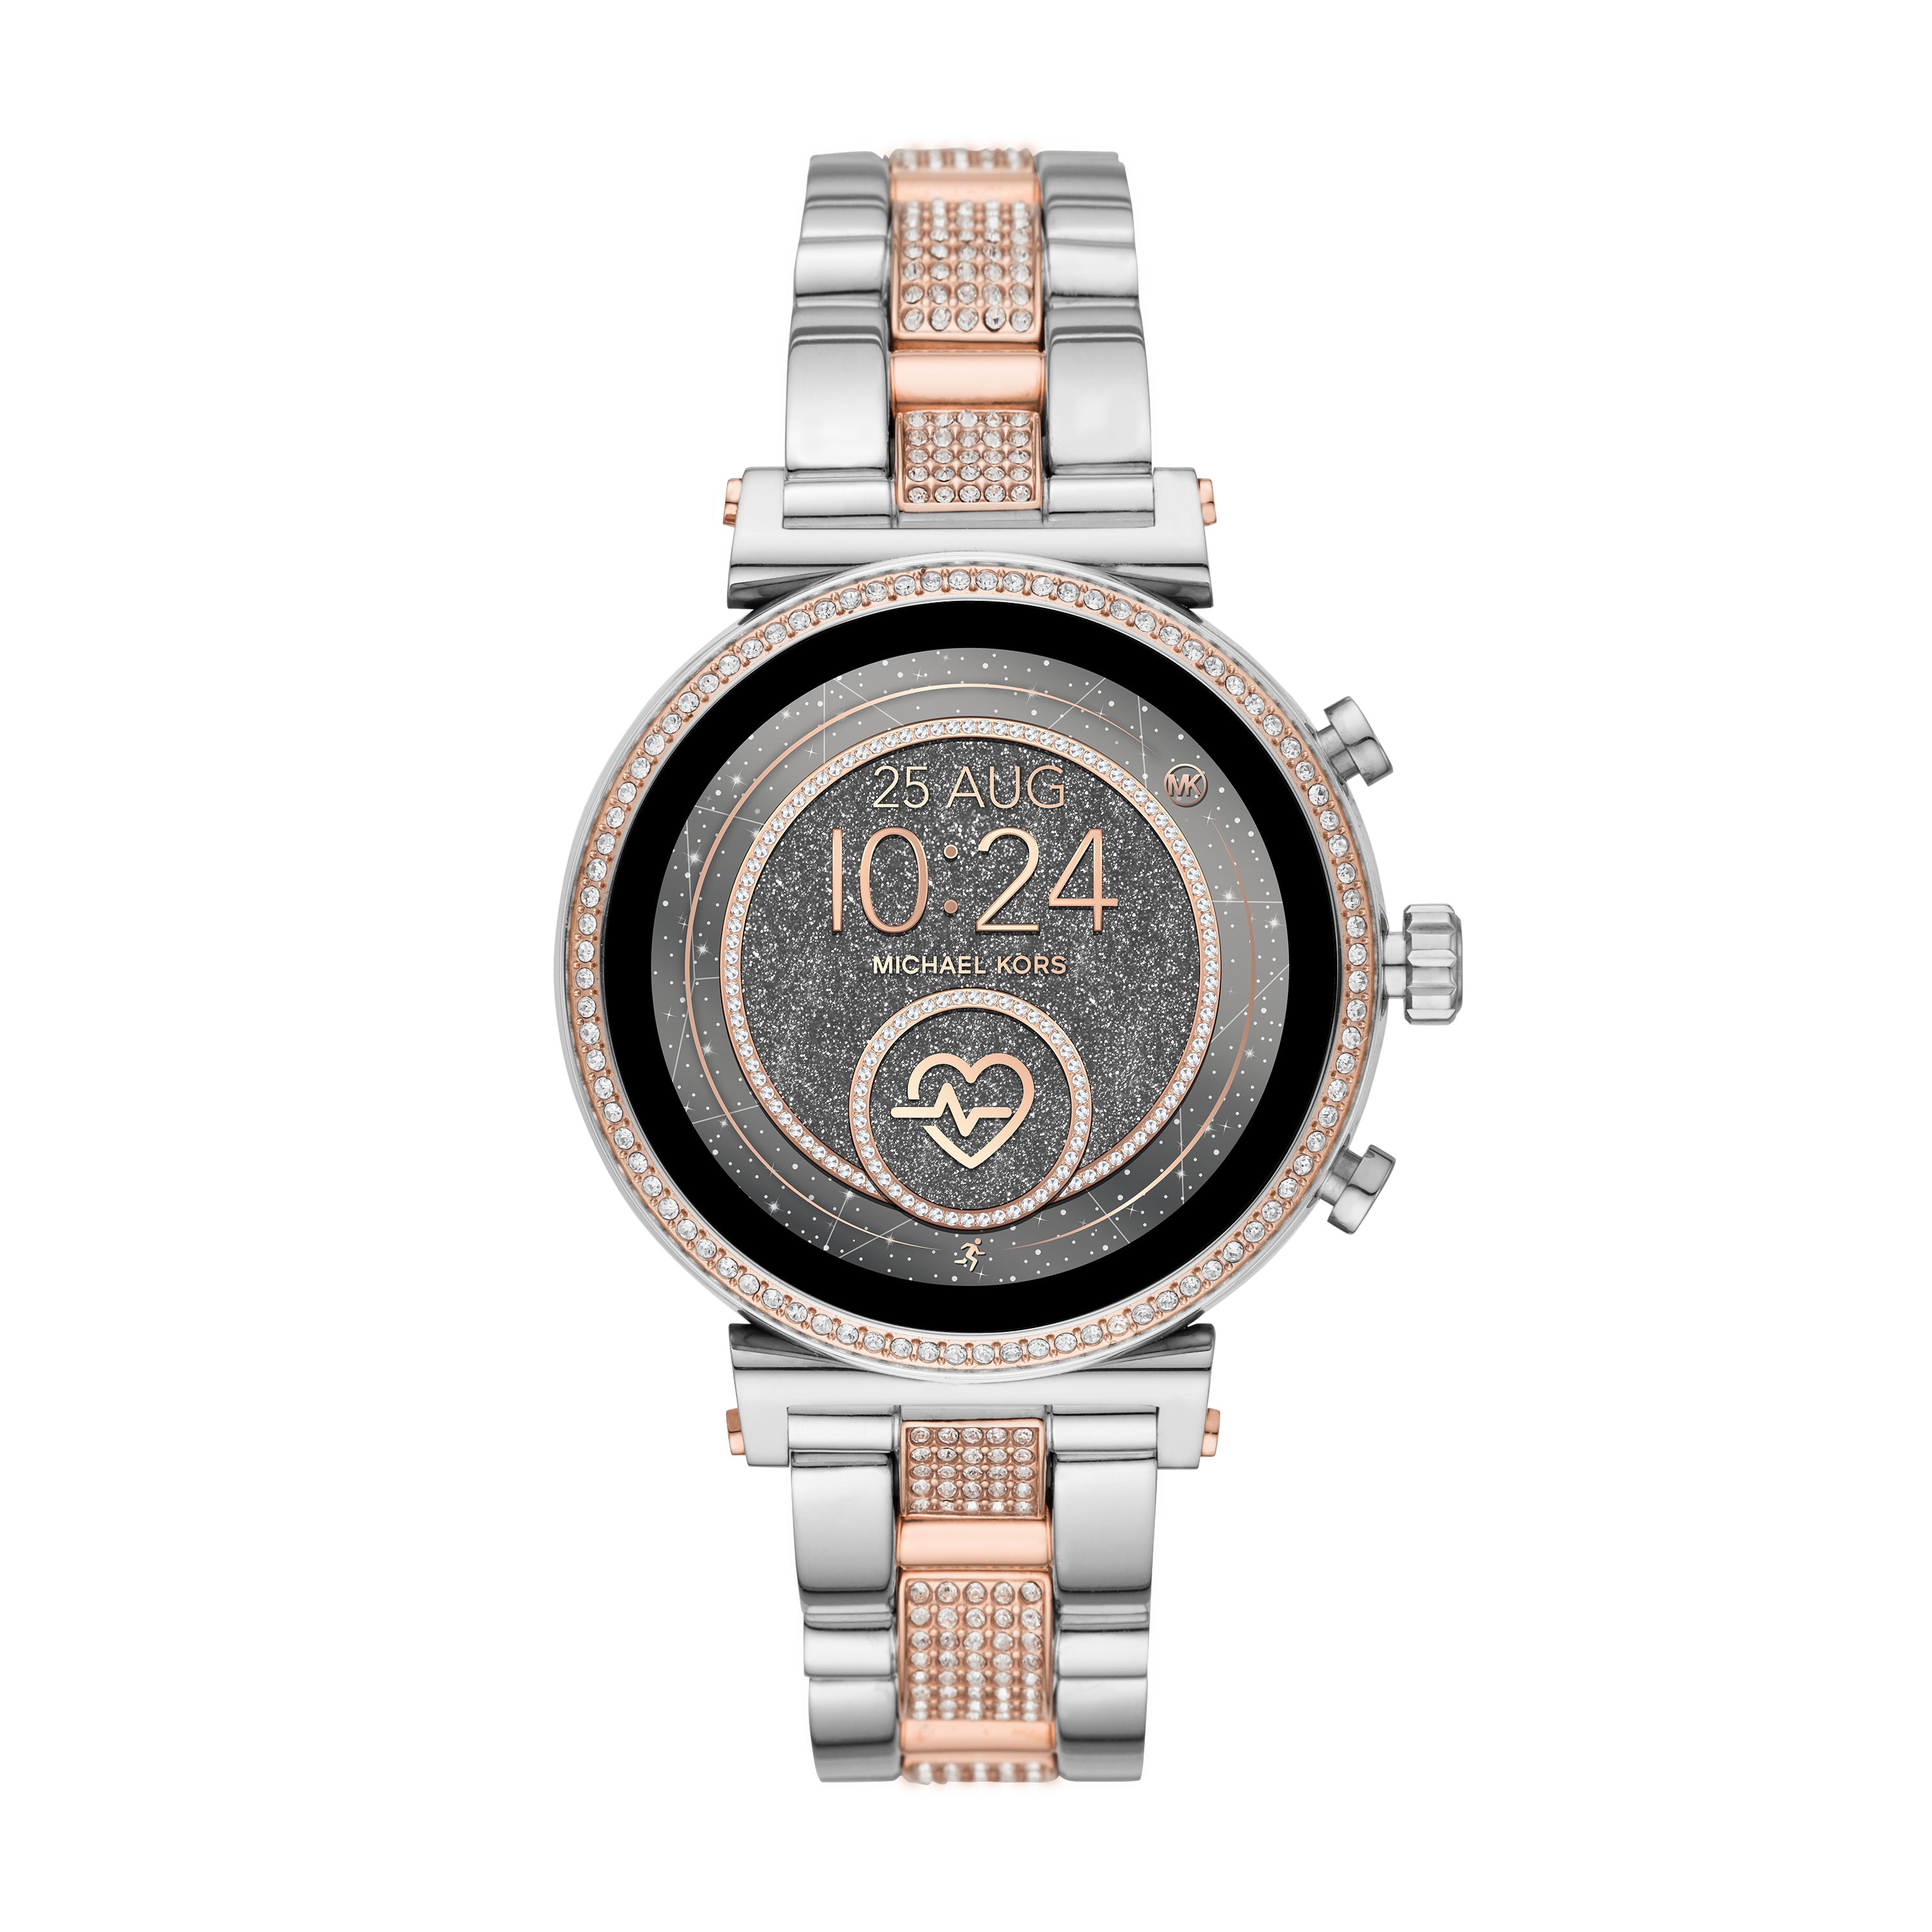 sofie pave two tone smartwatch